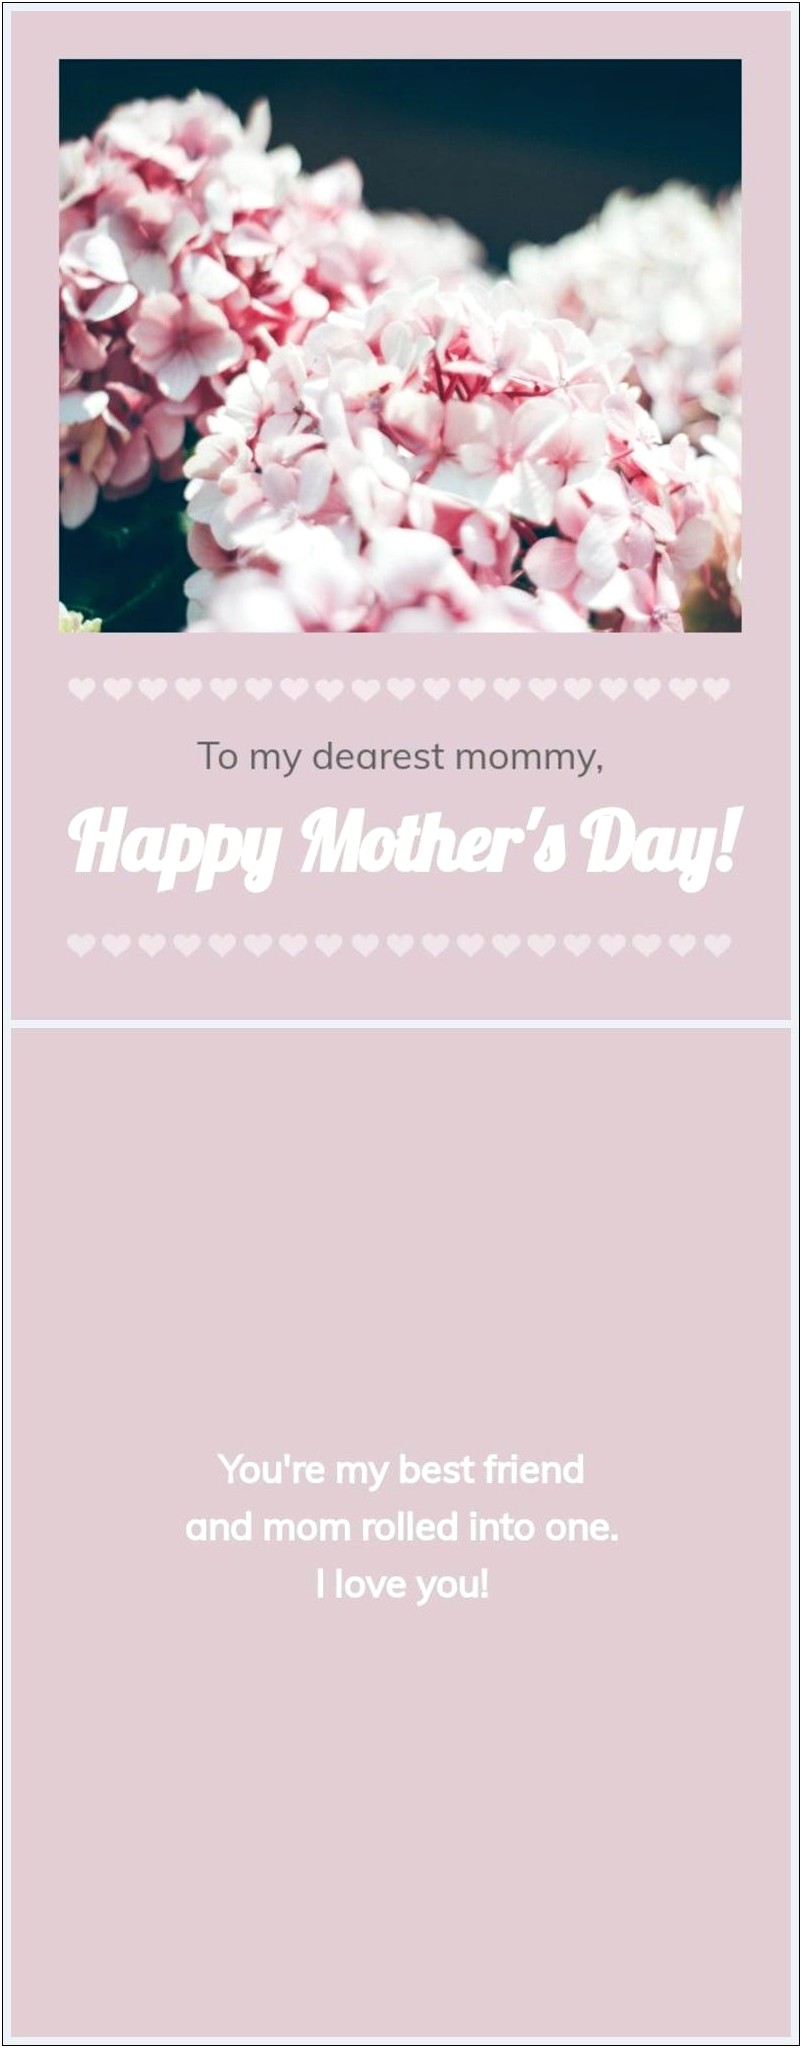 Free Mother Template With Flowers To Write On